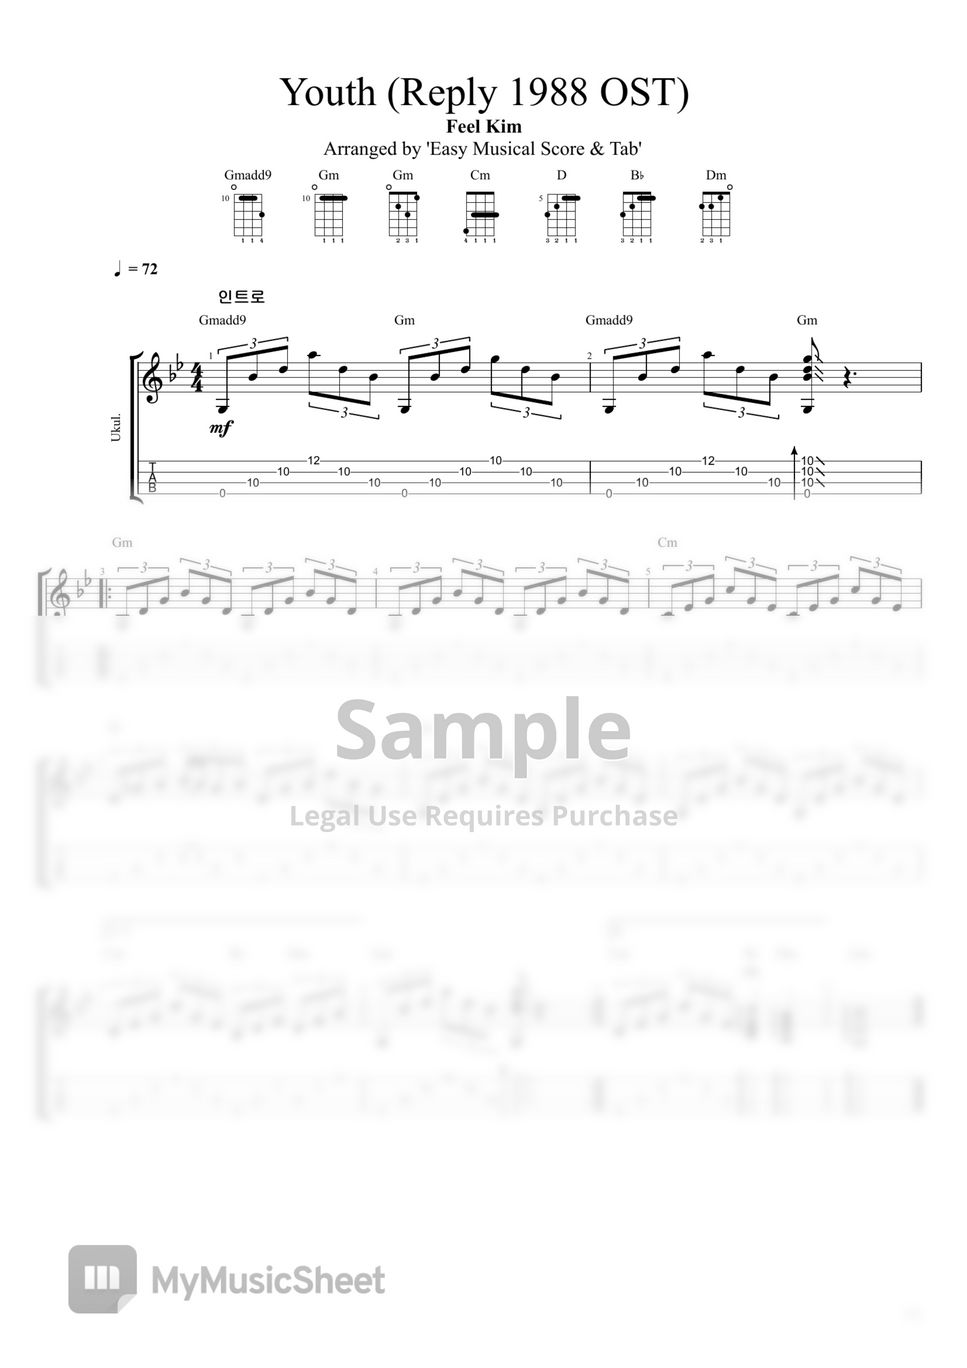 Feel Kim - Youth (Reply 1988 OST) Tab for Ukulele Backing by EMST